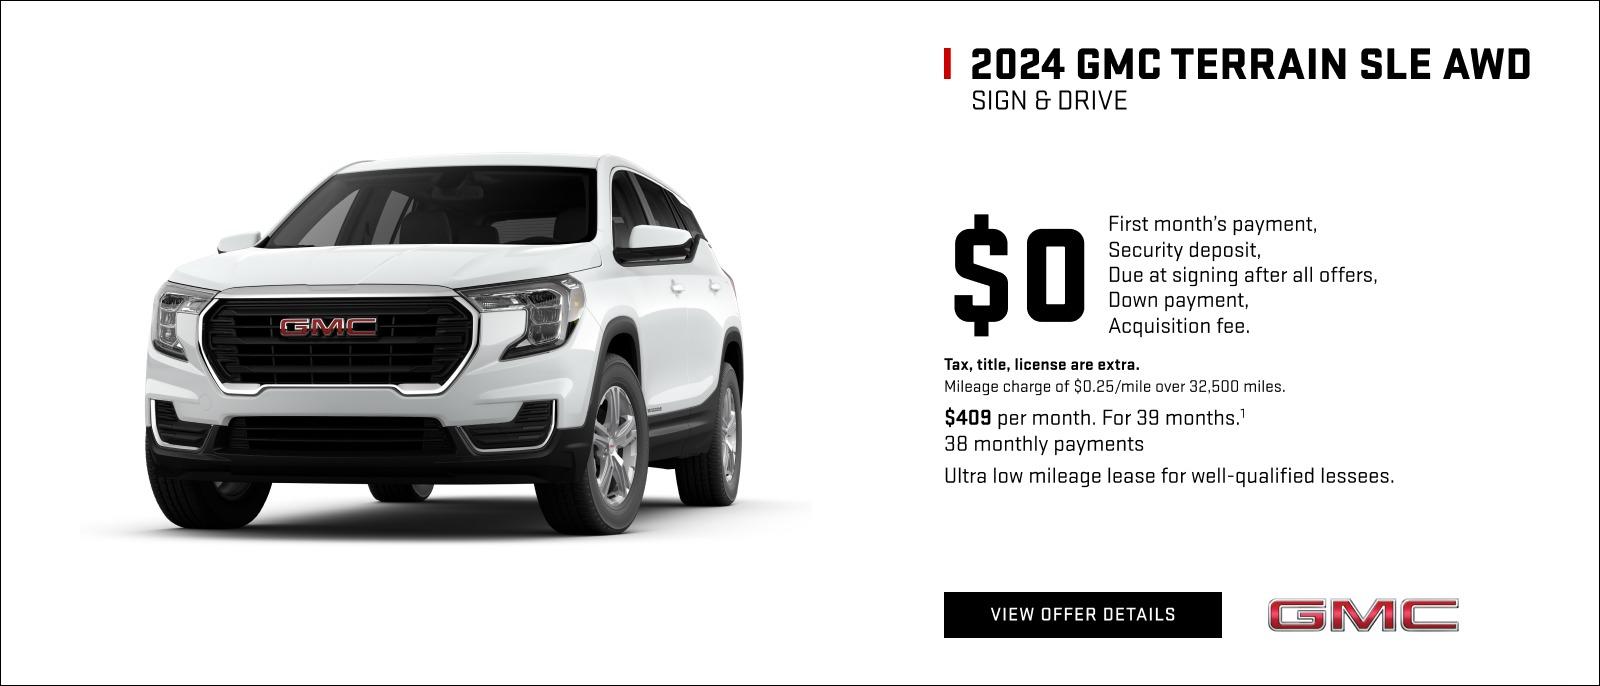 SIGN & DRIVE

$0
First month's payment,
Security deposit,
Due at lease signing after all offers,
Down payment,
Acquisition fee.

Tax, title, license are extra. Mileage charge of $0.25/mile over 32,500 miles.

$409 per month. For 39 months.1
38 monthly payments

Ultra low mileage lease for well-qualified lessees.